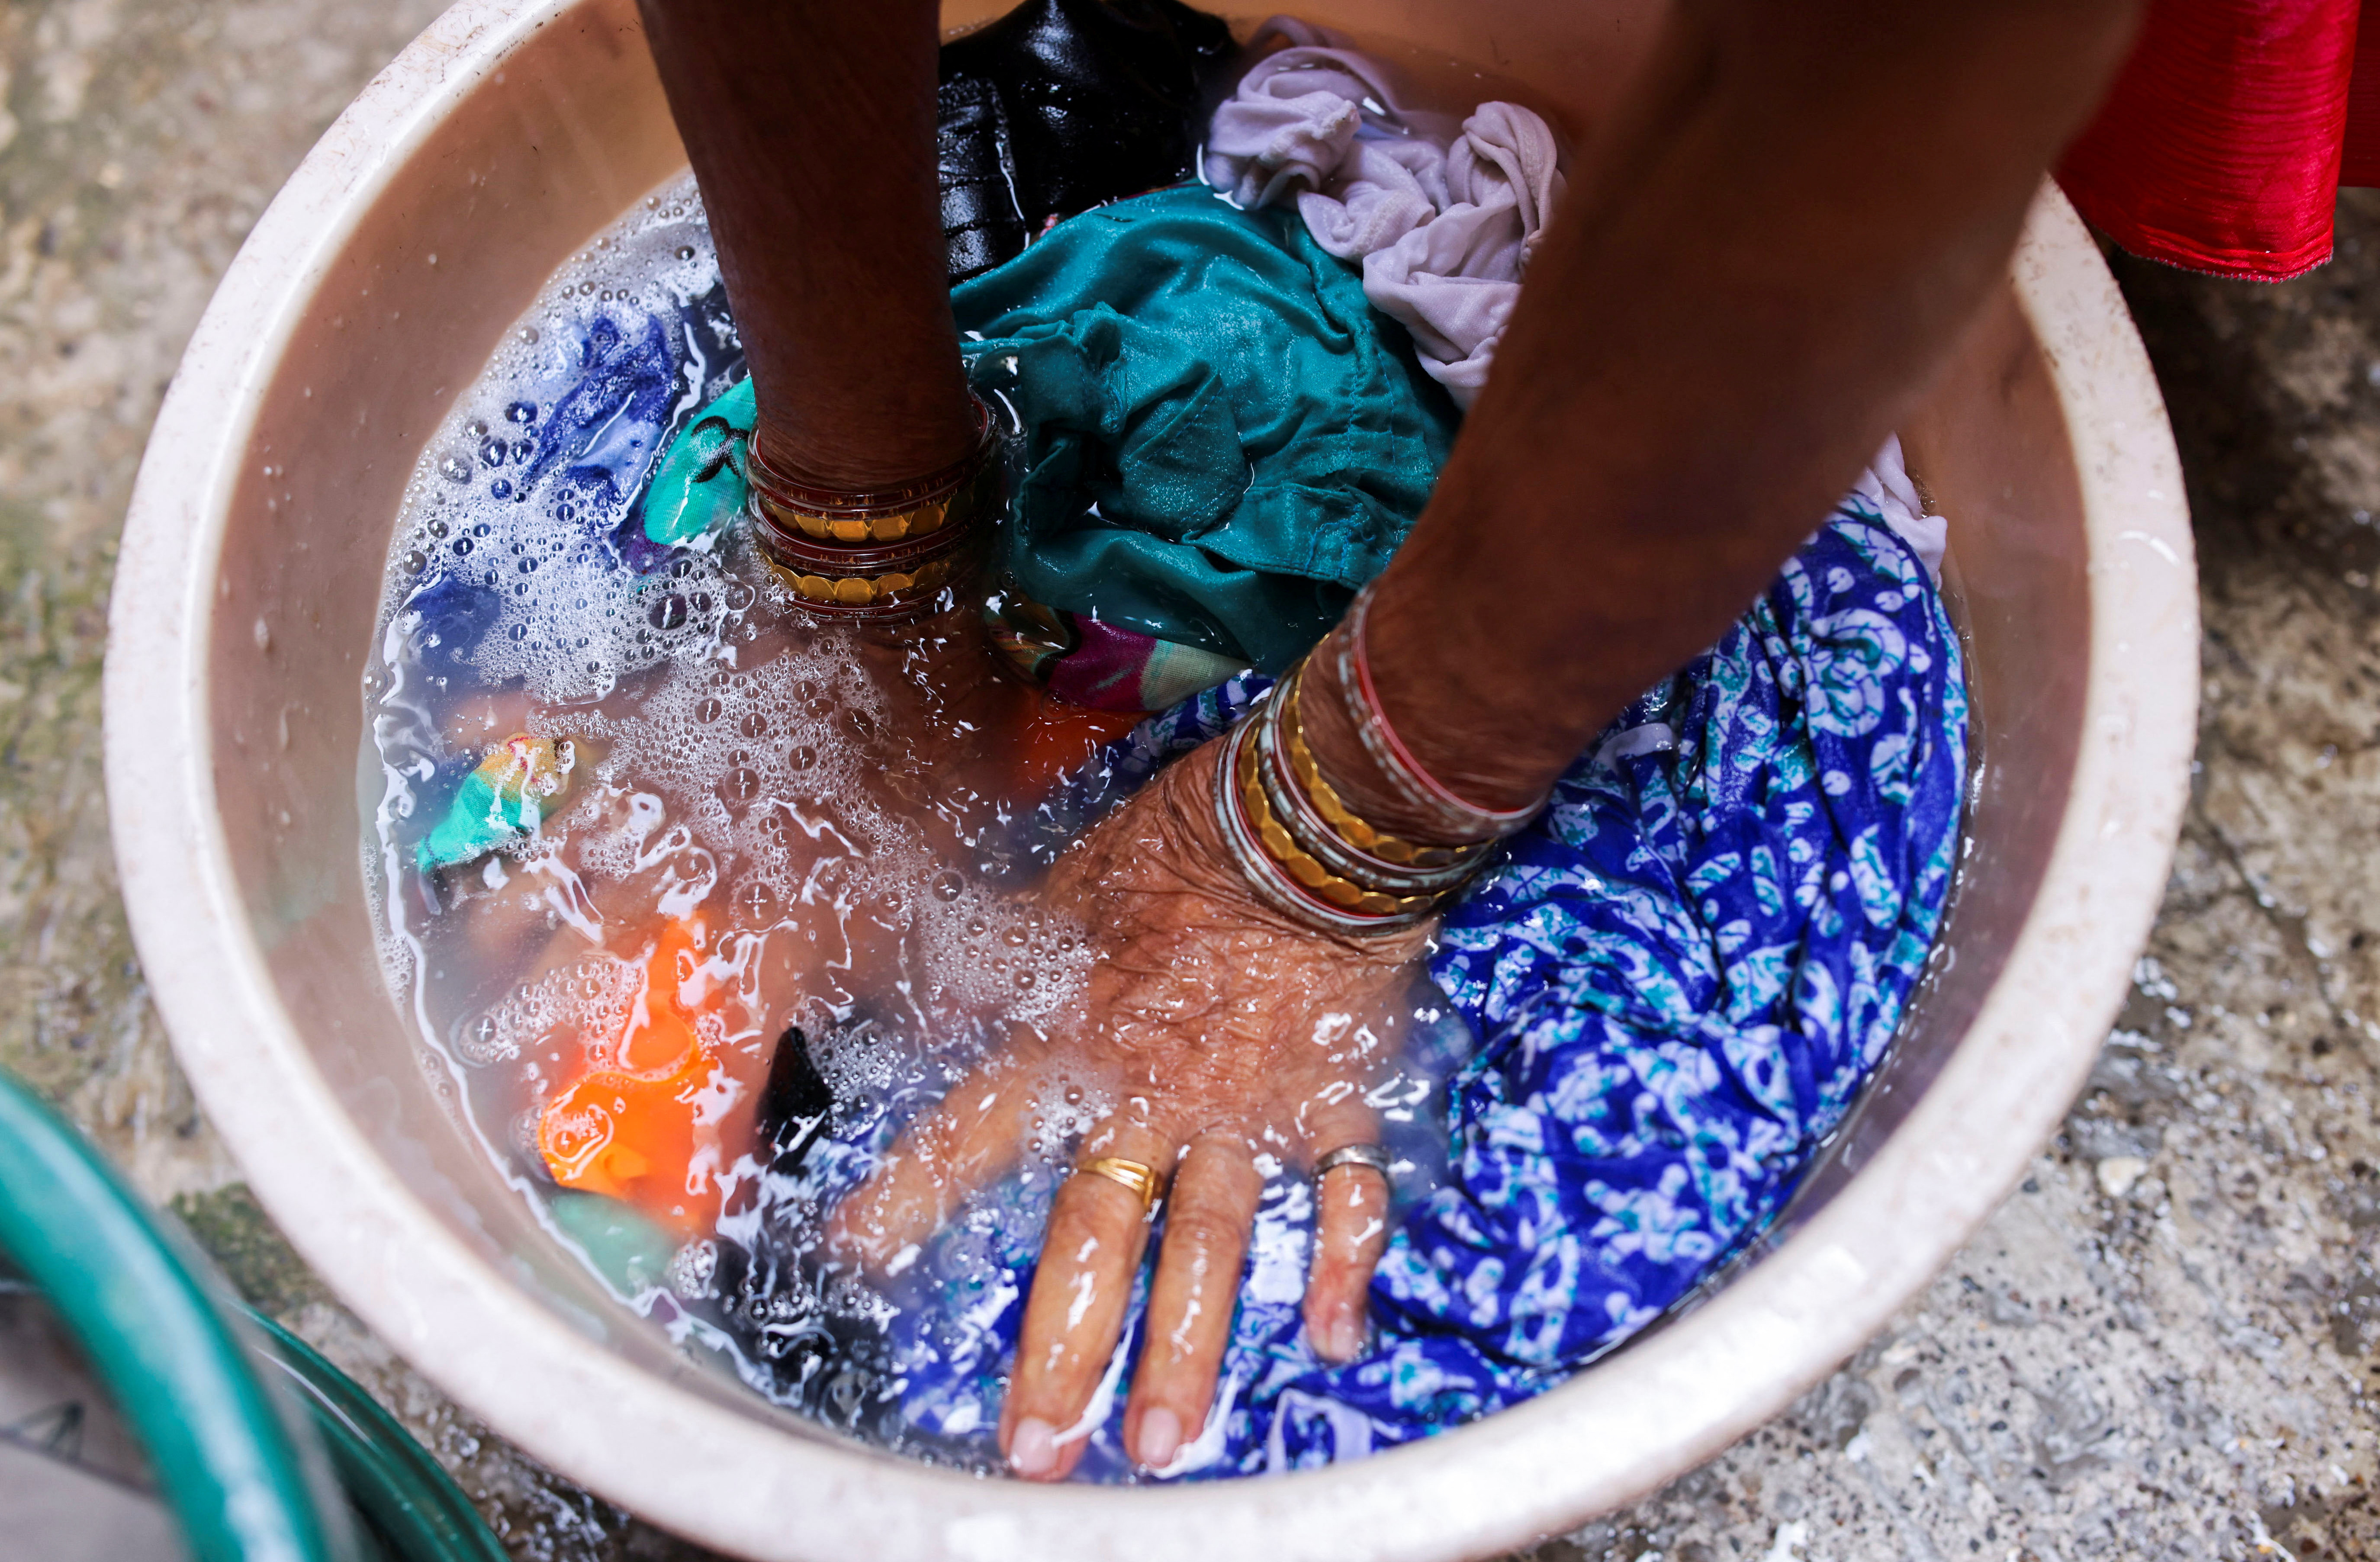 A woman washes clothes with a plastic sachet portion of Unilever's Surf Excel laundry detergent outside her house in Mumbai